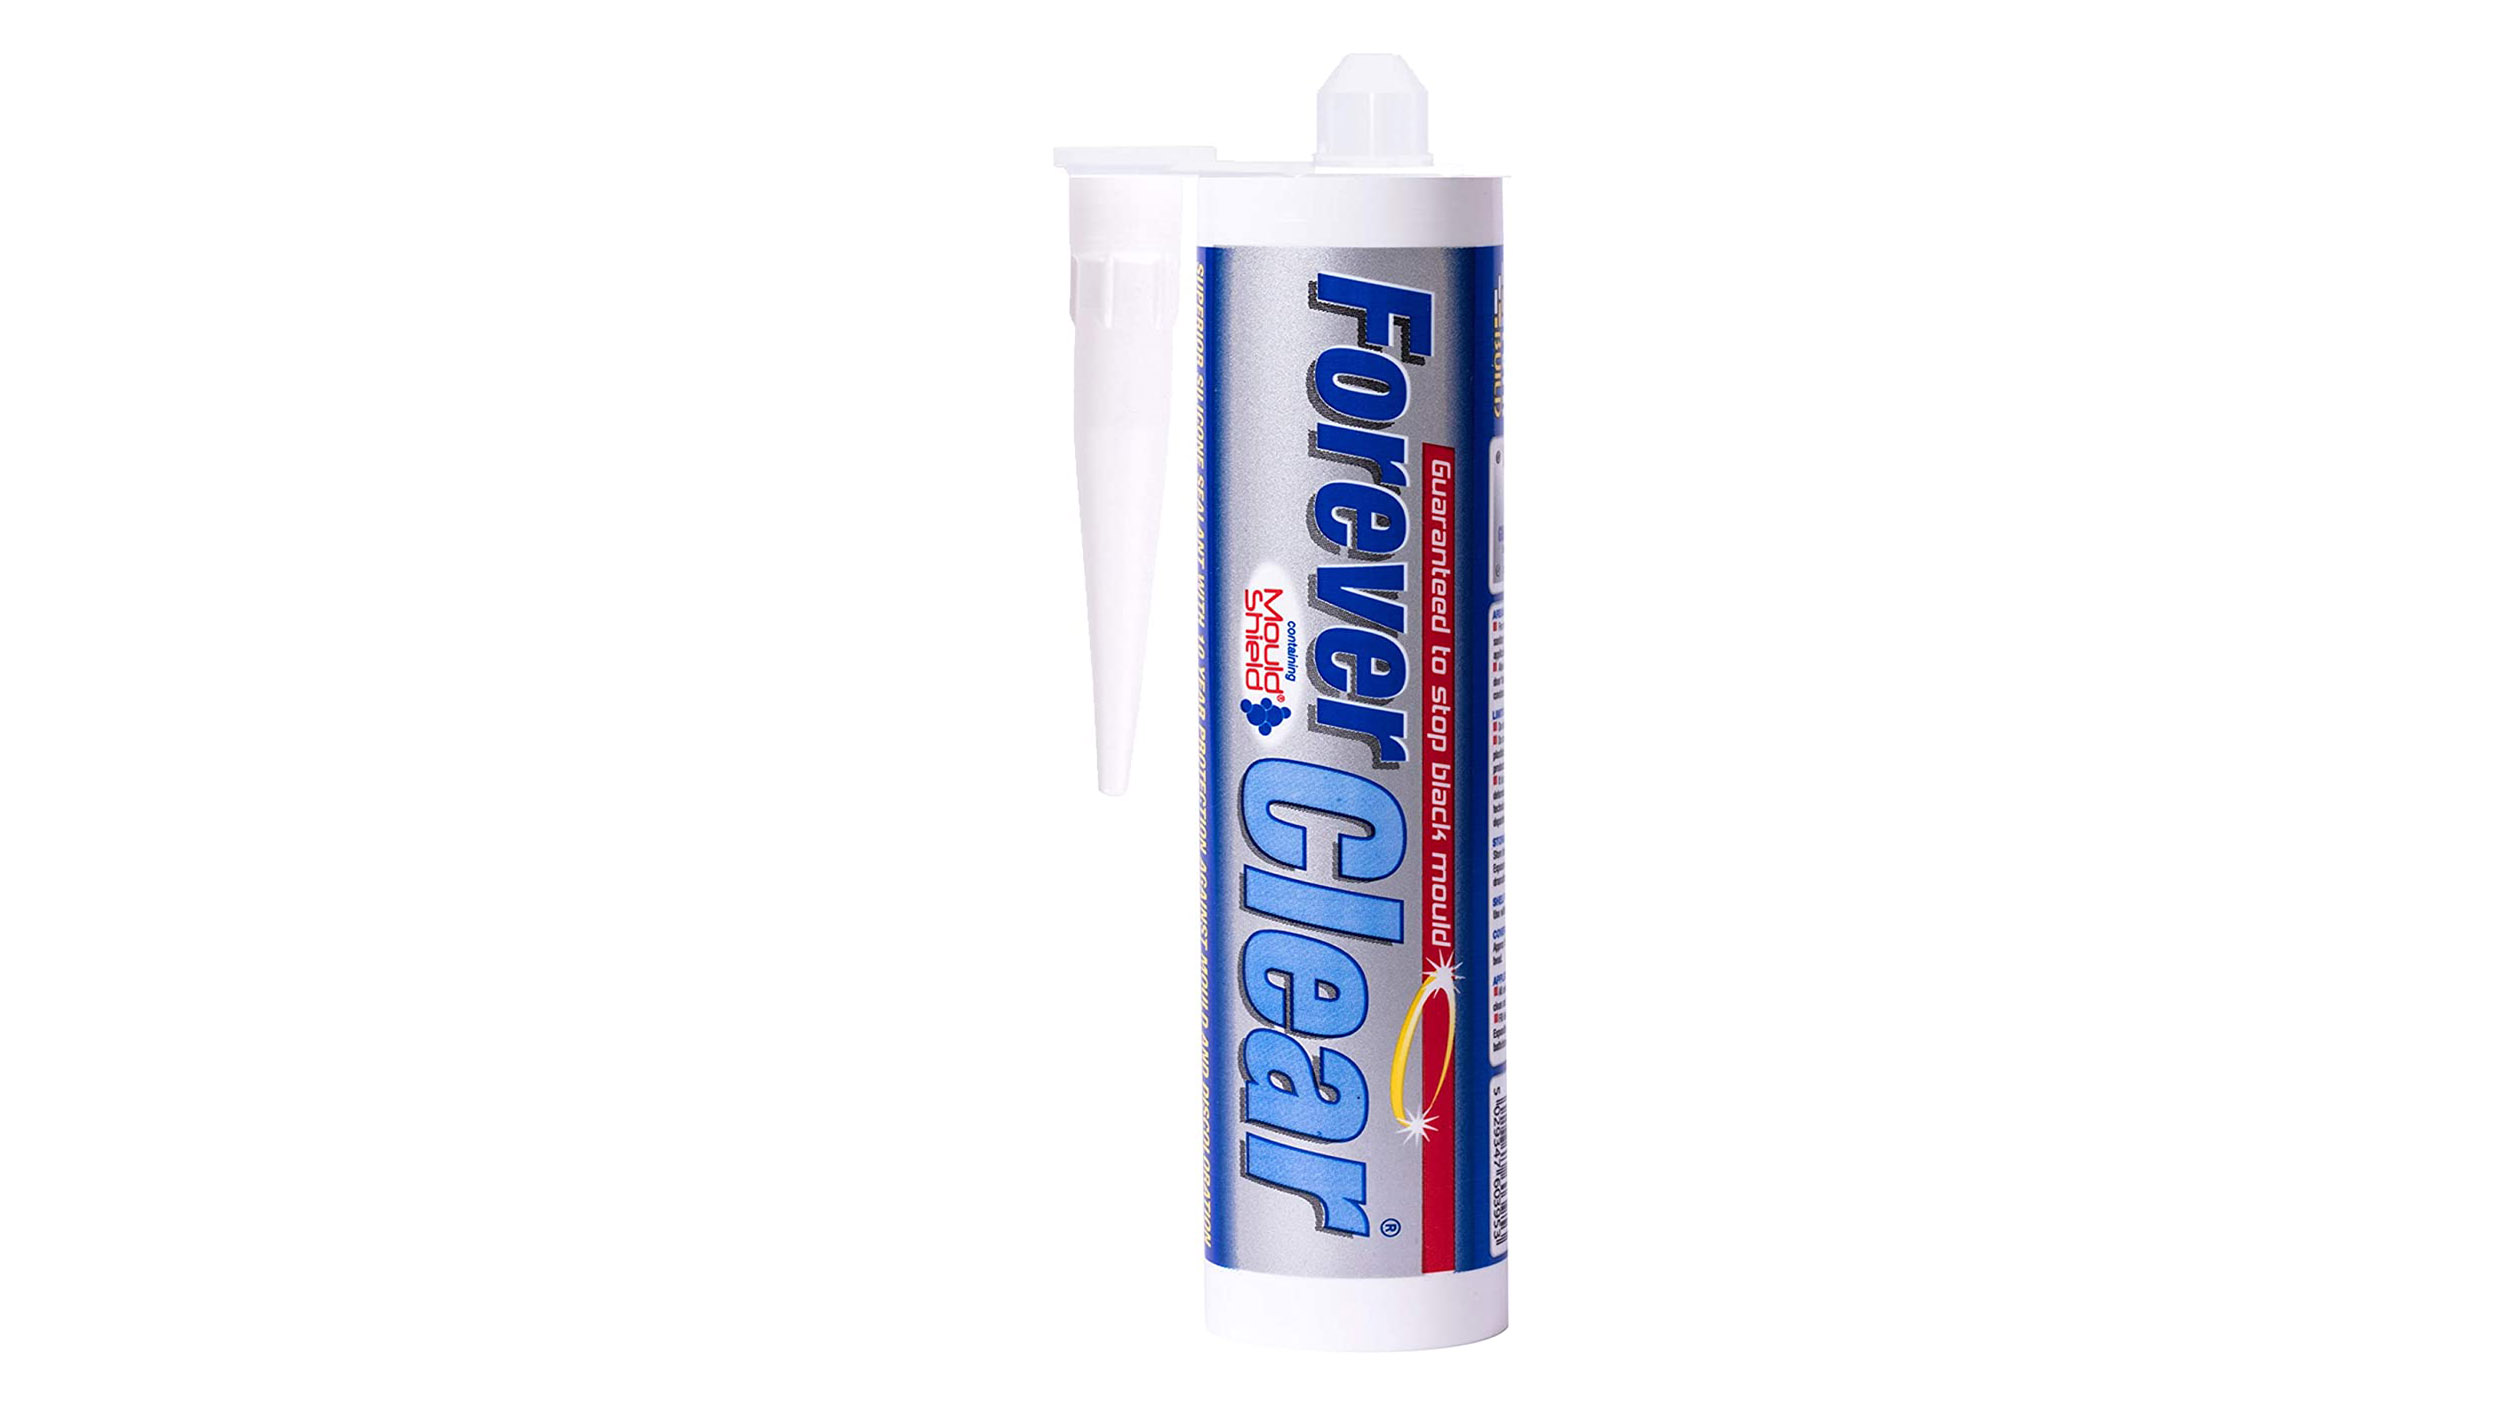 The Forever Clear Anti-Mould Bathroom Sealant is one of the best bathroom sealants